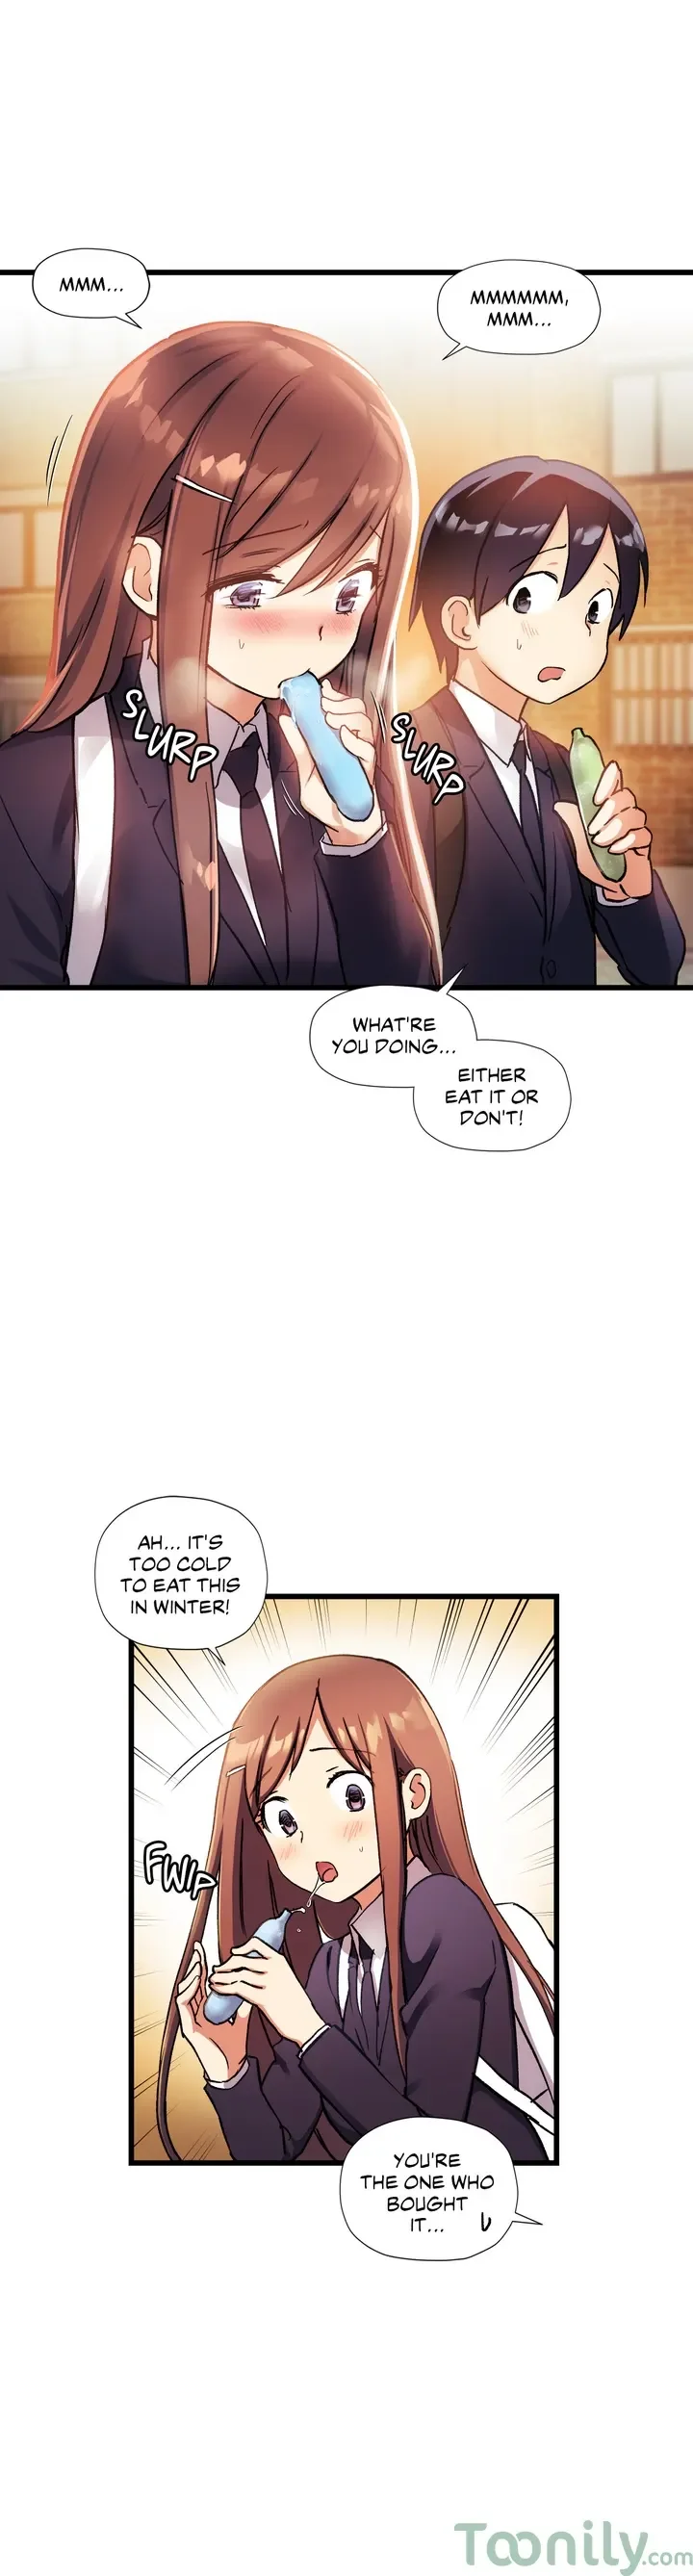 under-observation-my-first-loves-and-i-chap-31-5